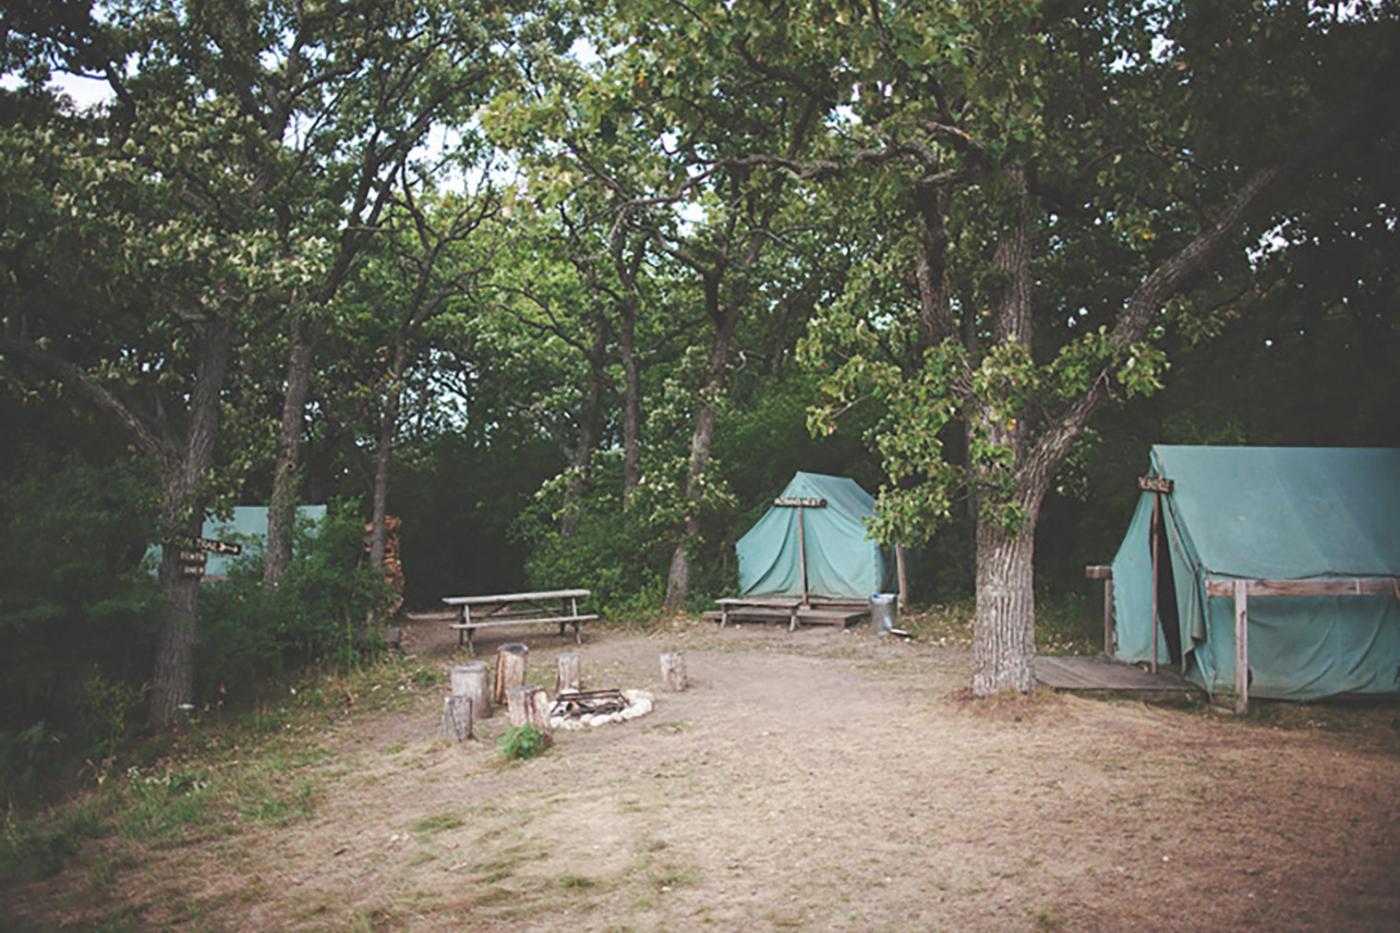 The perfect spot to for a summer campsite - Camp Wandawega, Wisconsin.